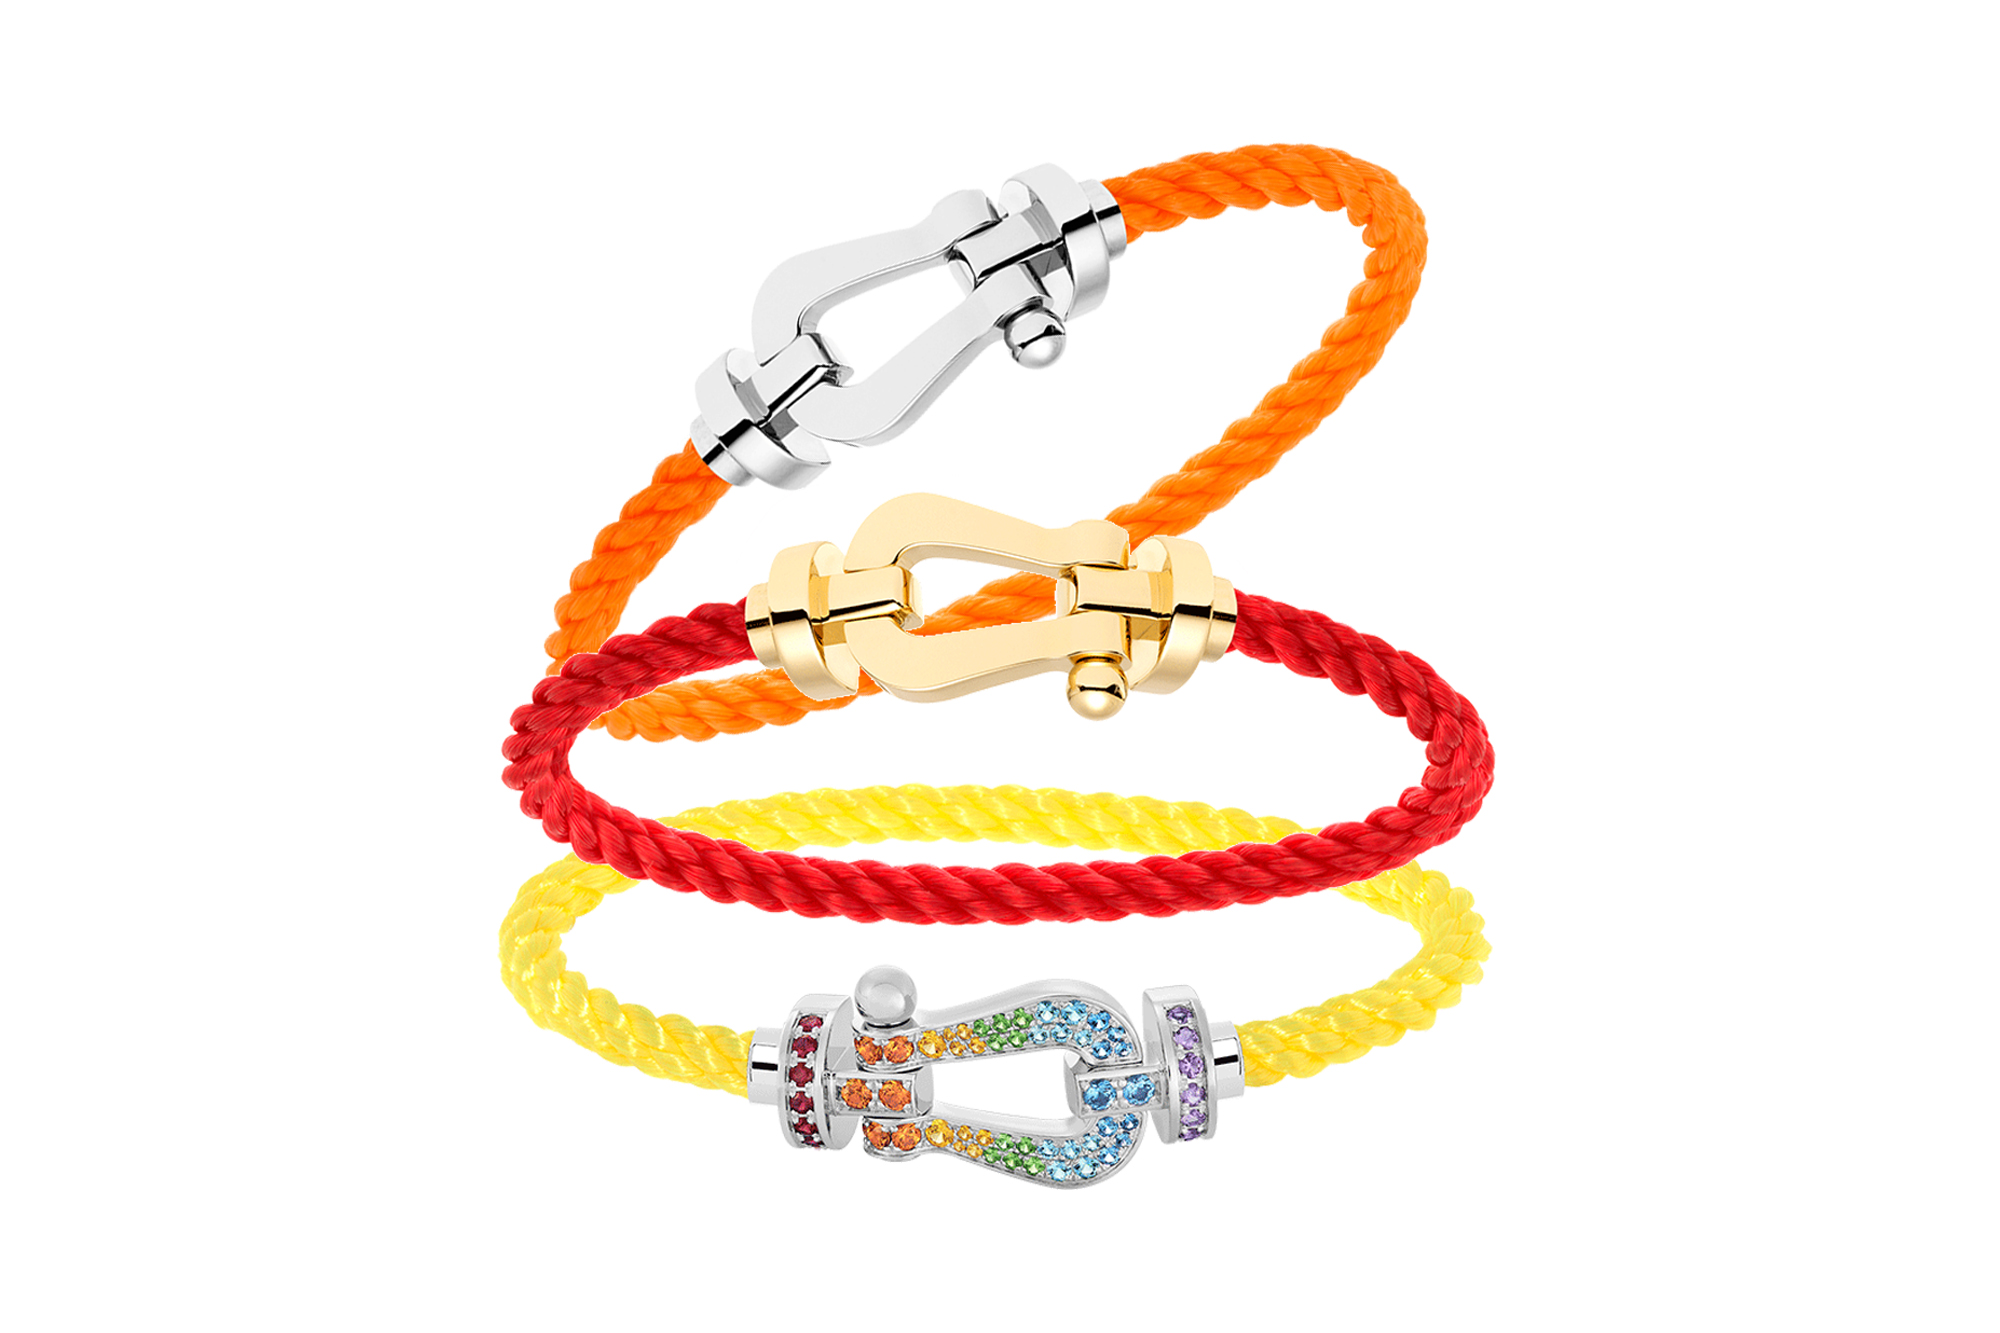 The new Fred Force 10 bracelet collection – Yakymour